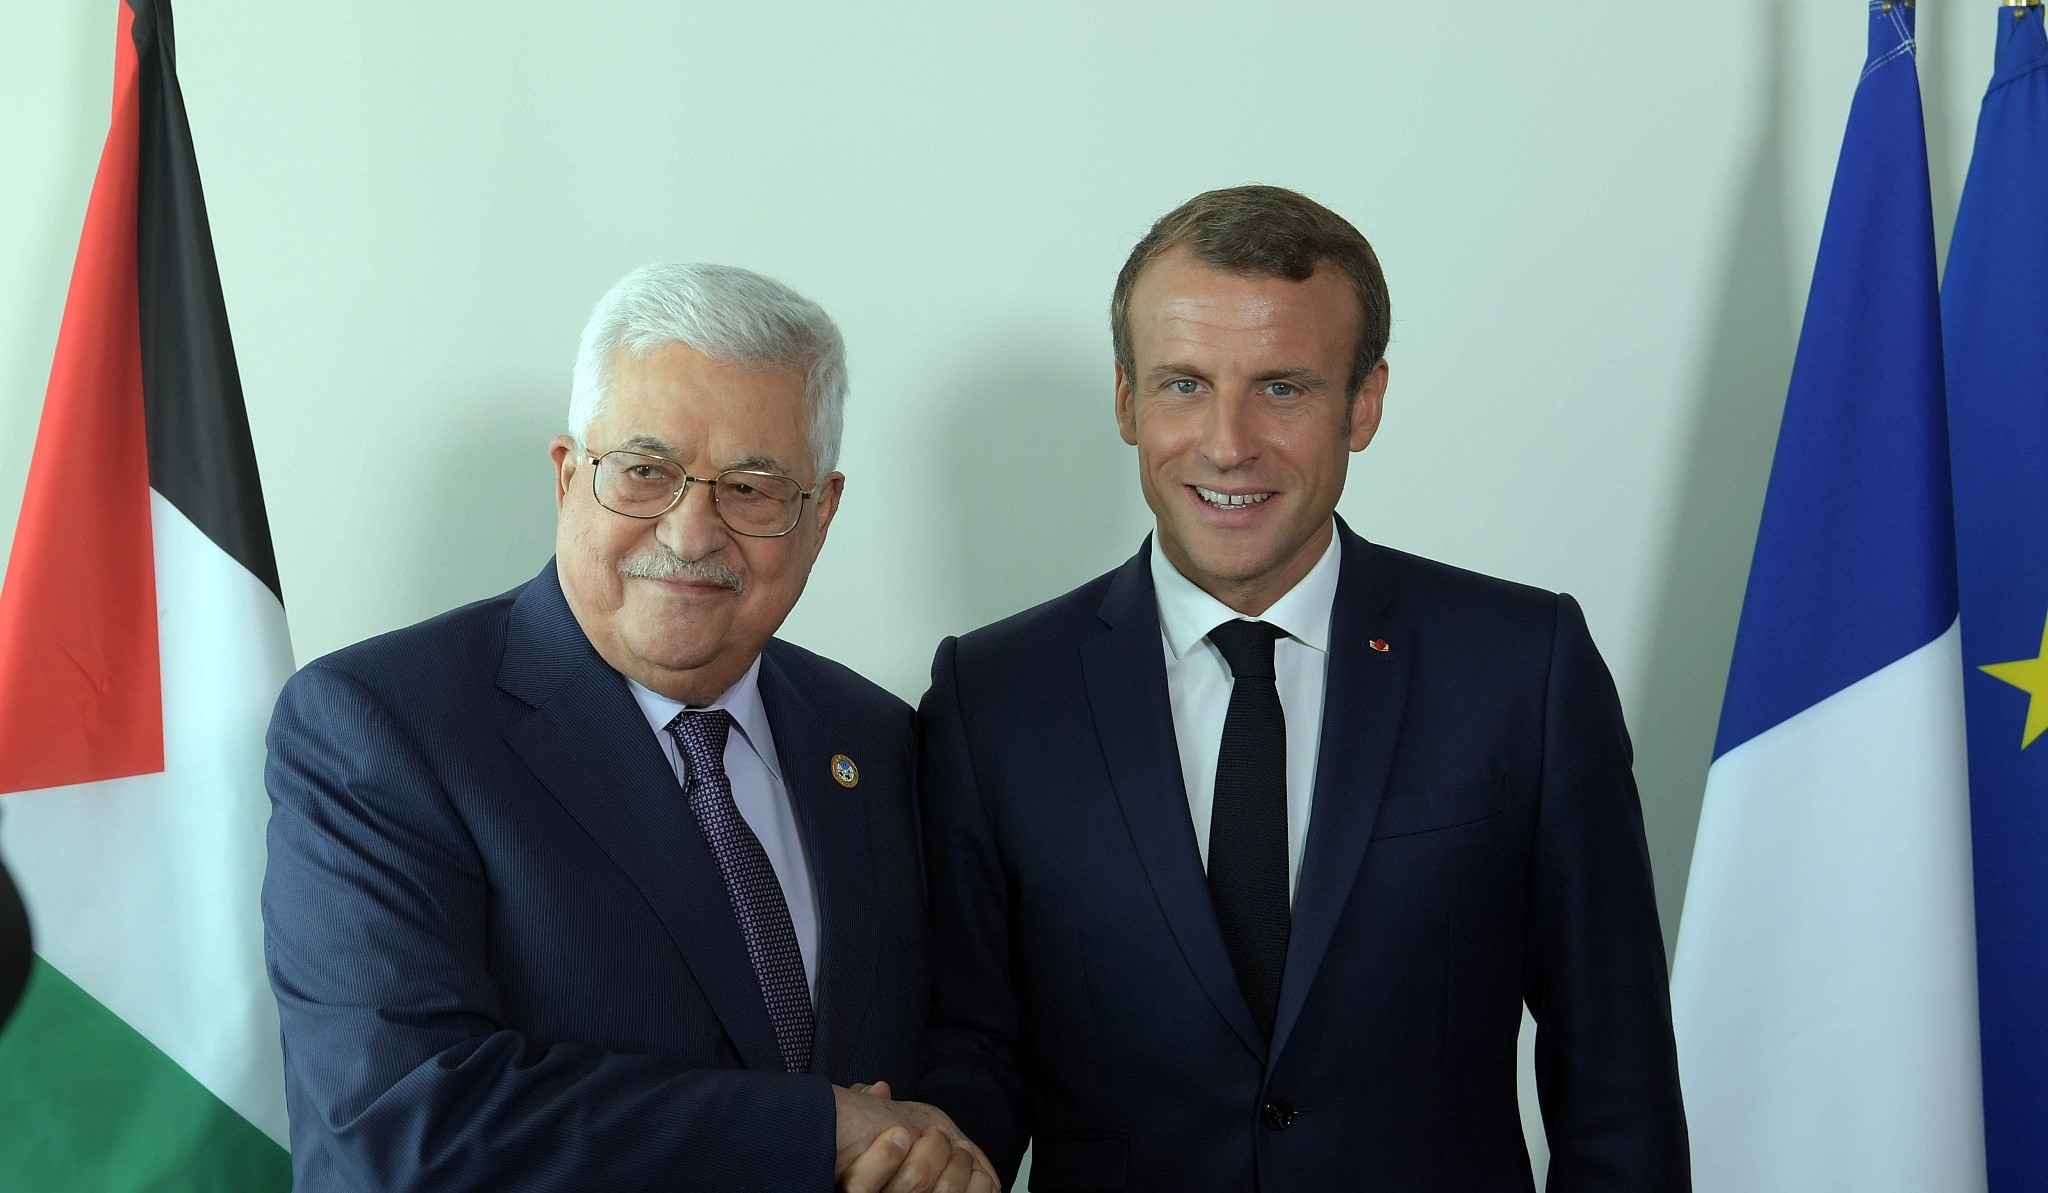 Macron calls for 're-igniting the fire' in Middle East peace talks, as he meets with Abbas